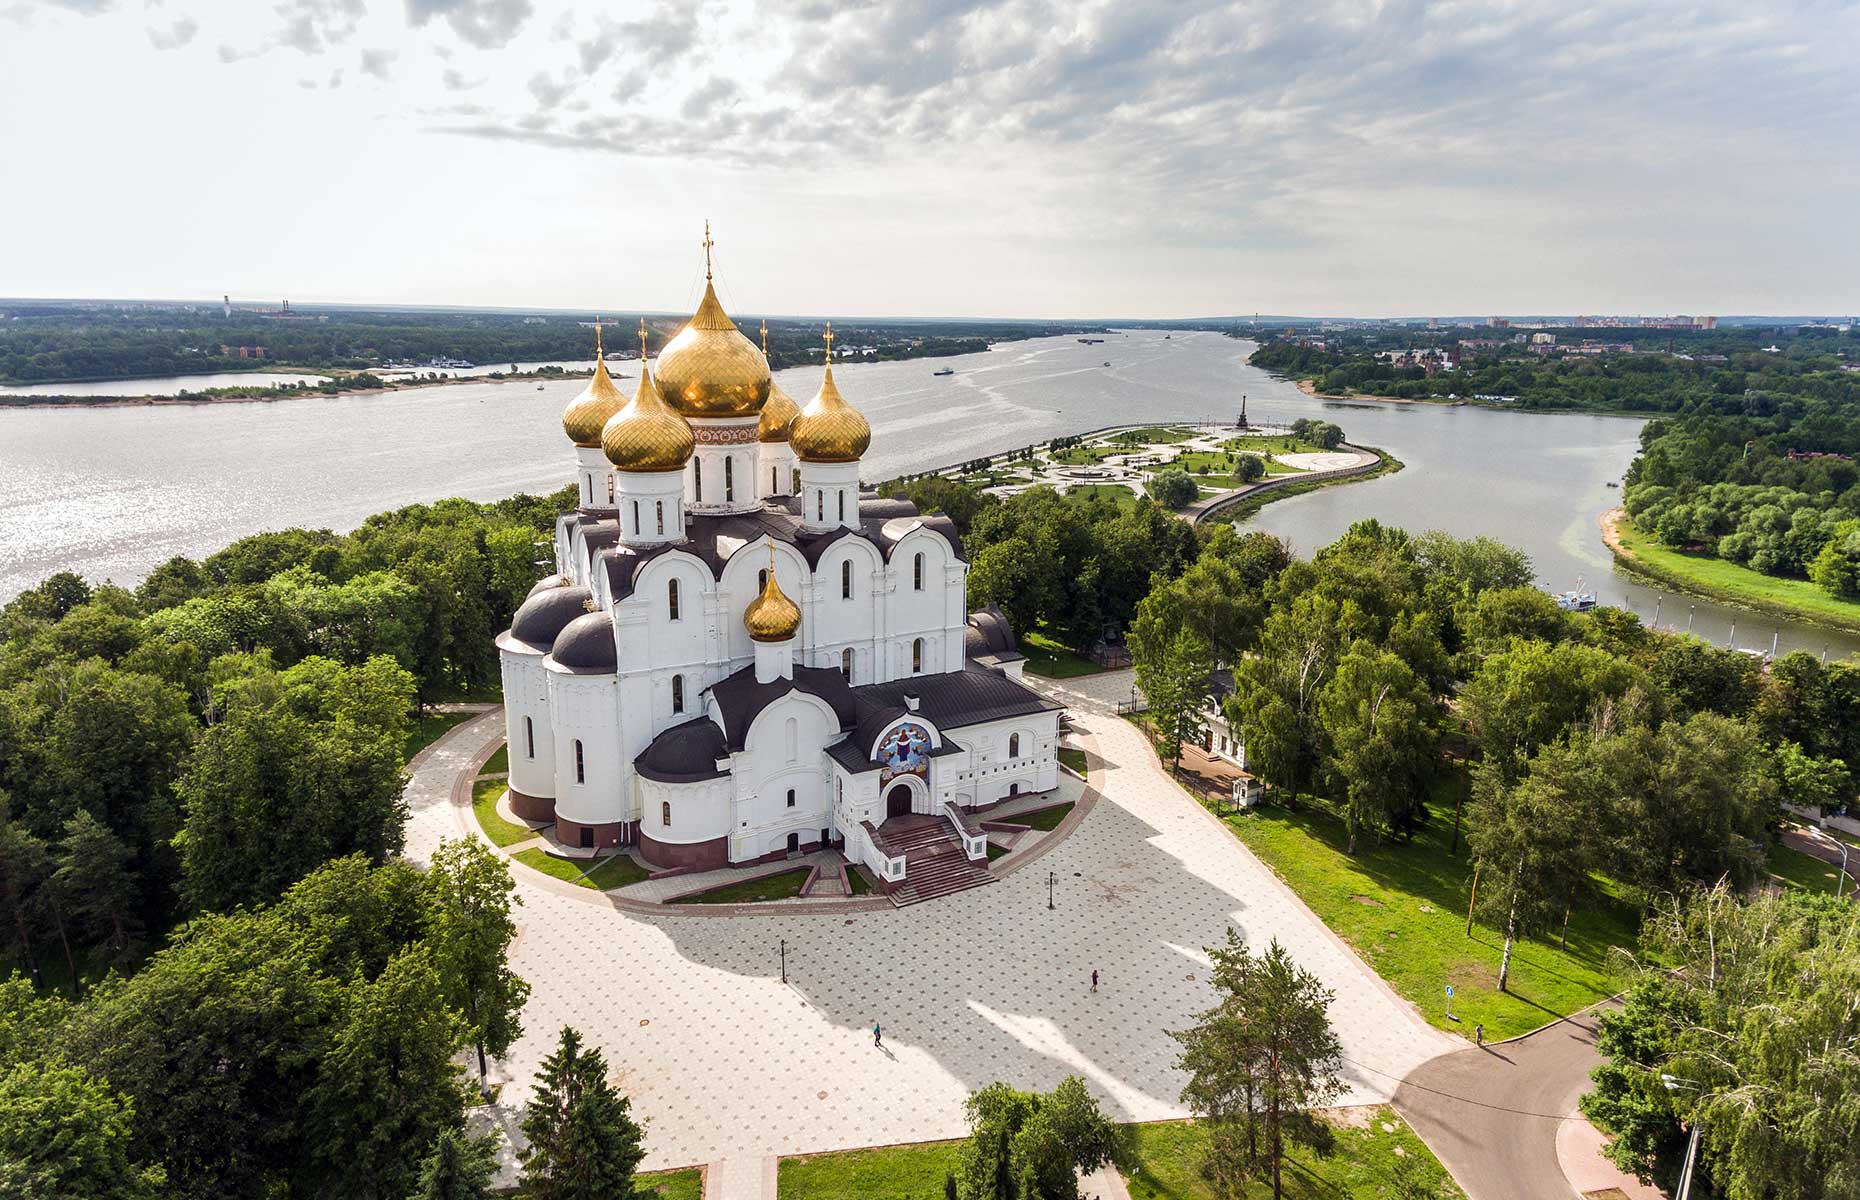 Picturesque Yaroslavl is one of many destinations you can see on a river cruise (Image: Andrey Pozharskiy/Shutterstock)